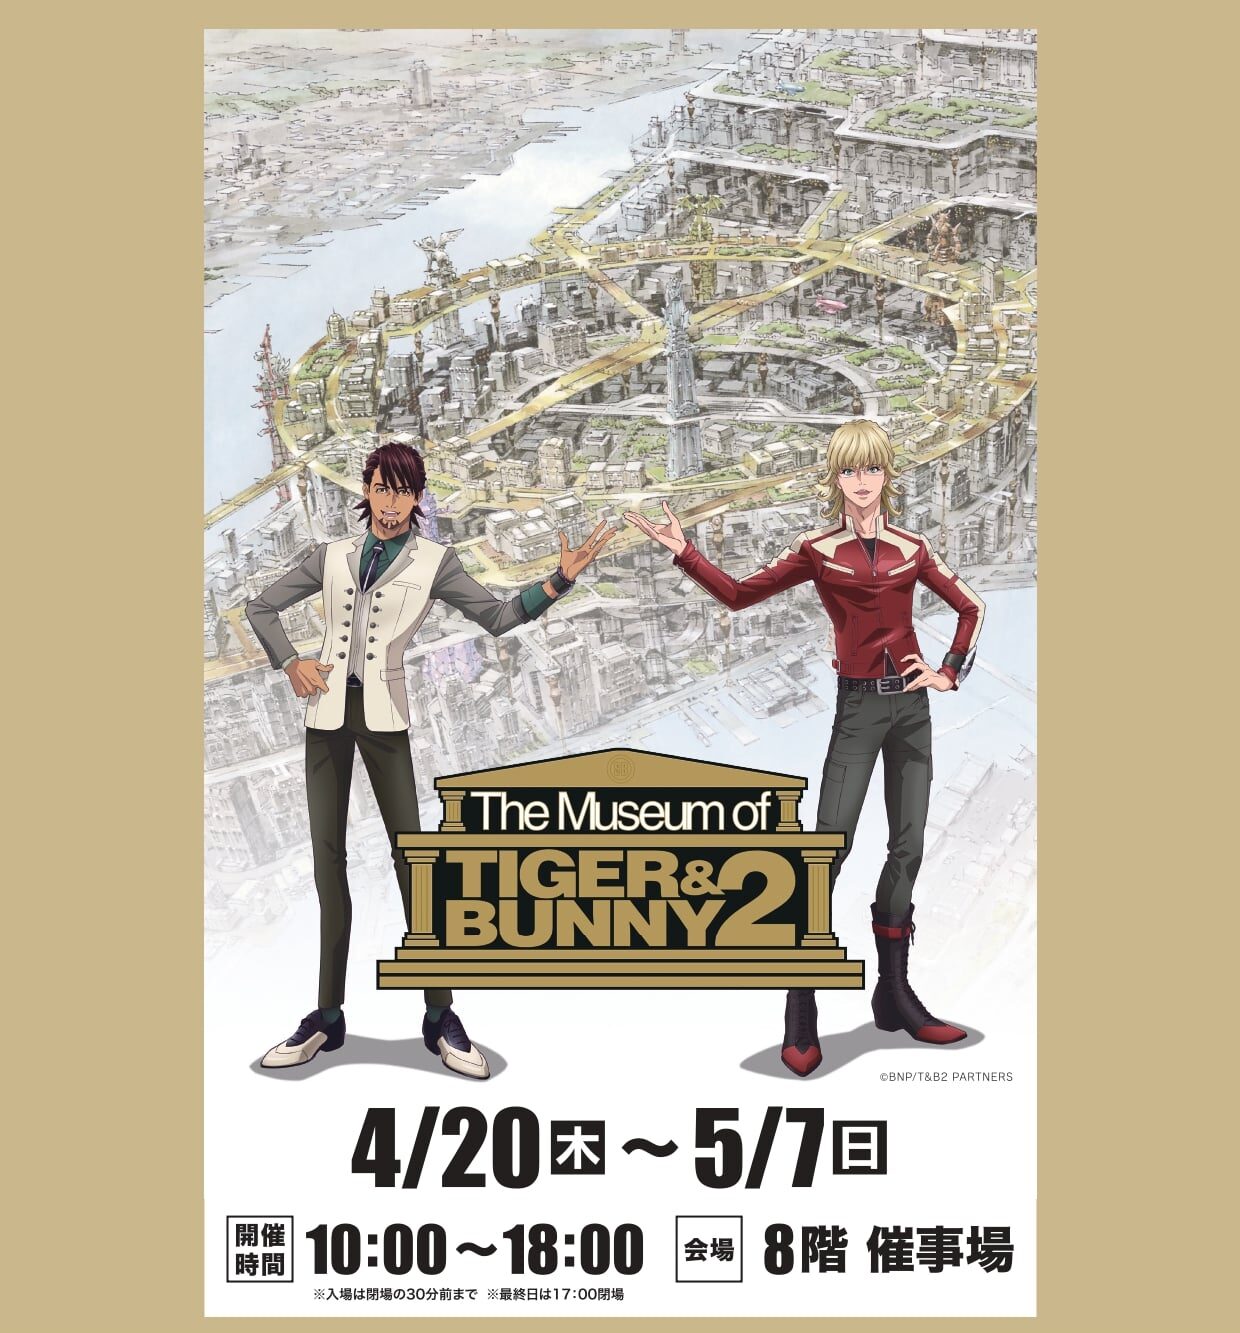 「The Museum of TIGER & BUNNY 2」<br>5/7(日)まで金沢エムザで開催中。